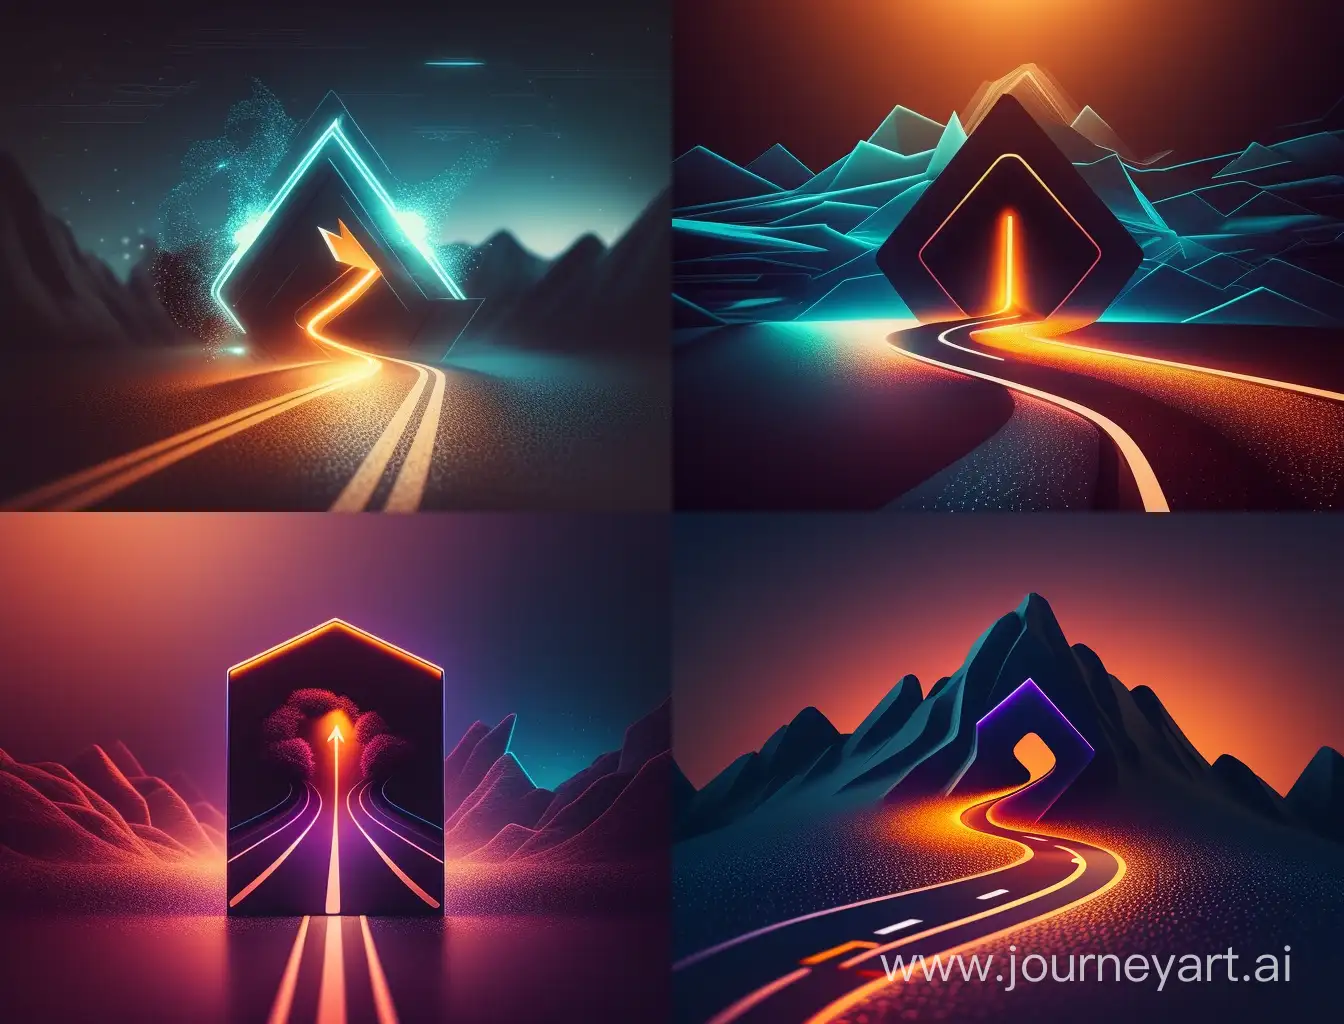 A glowing navigation icon points towards a road on an abstract background.